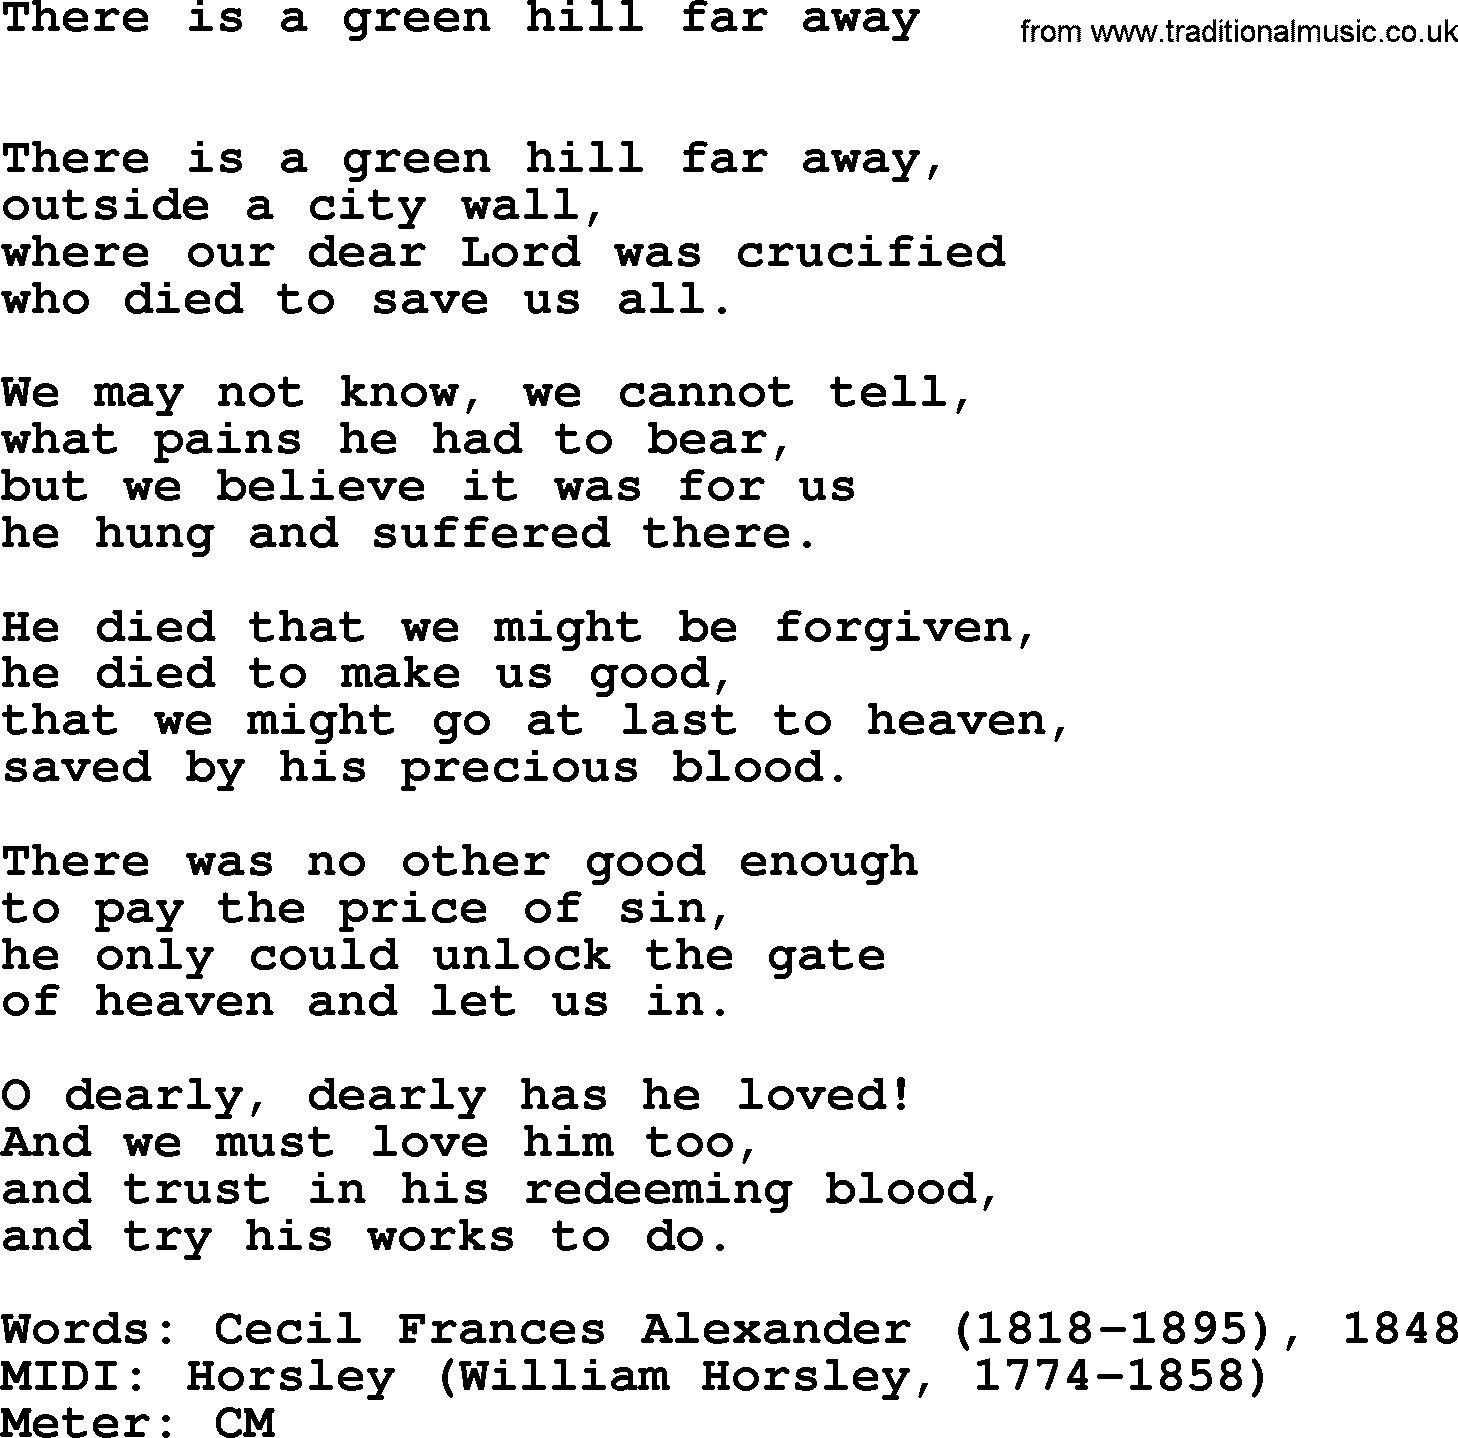 Book of Common Praise Hymn: There Is A Green Hill Far Away.txt lyrics with midi music